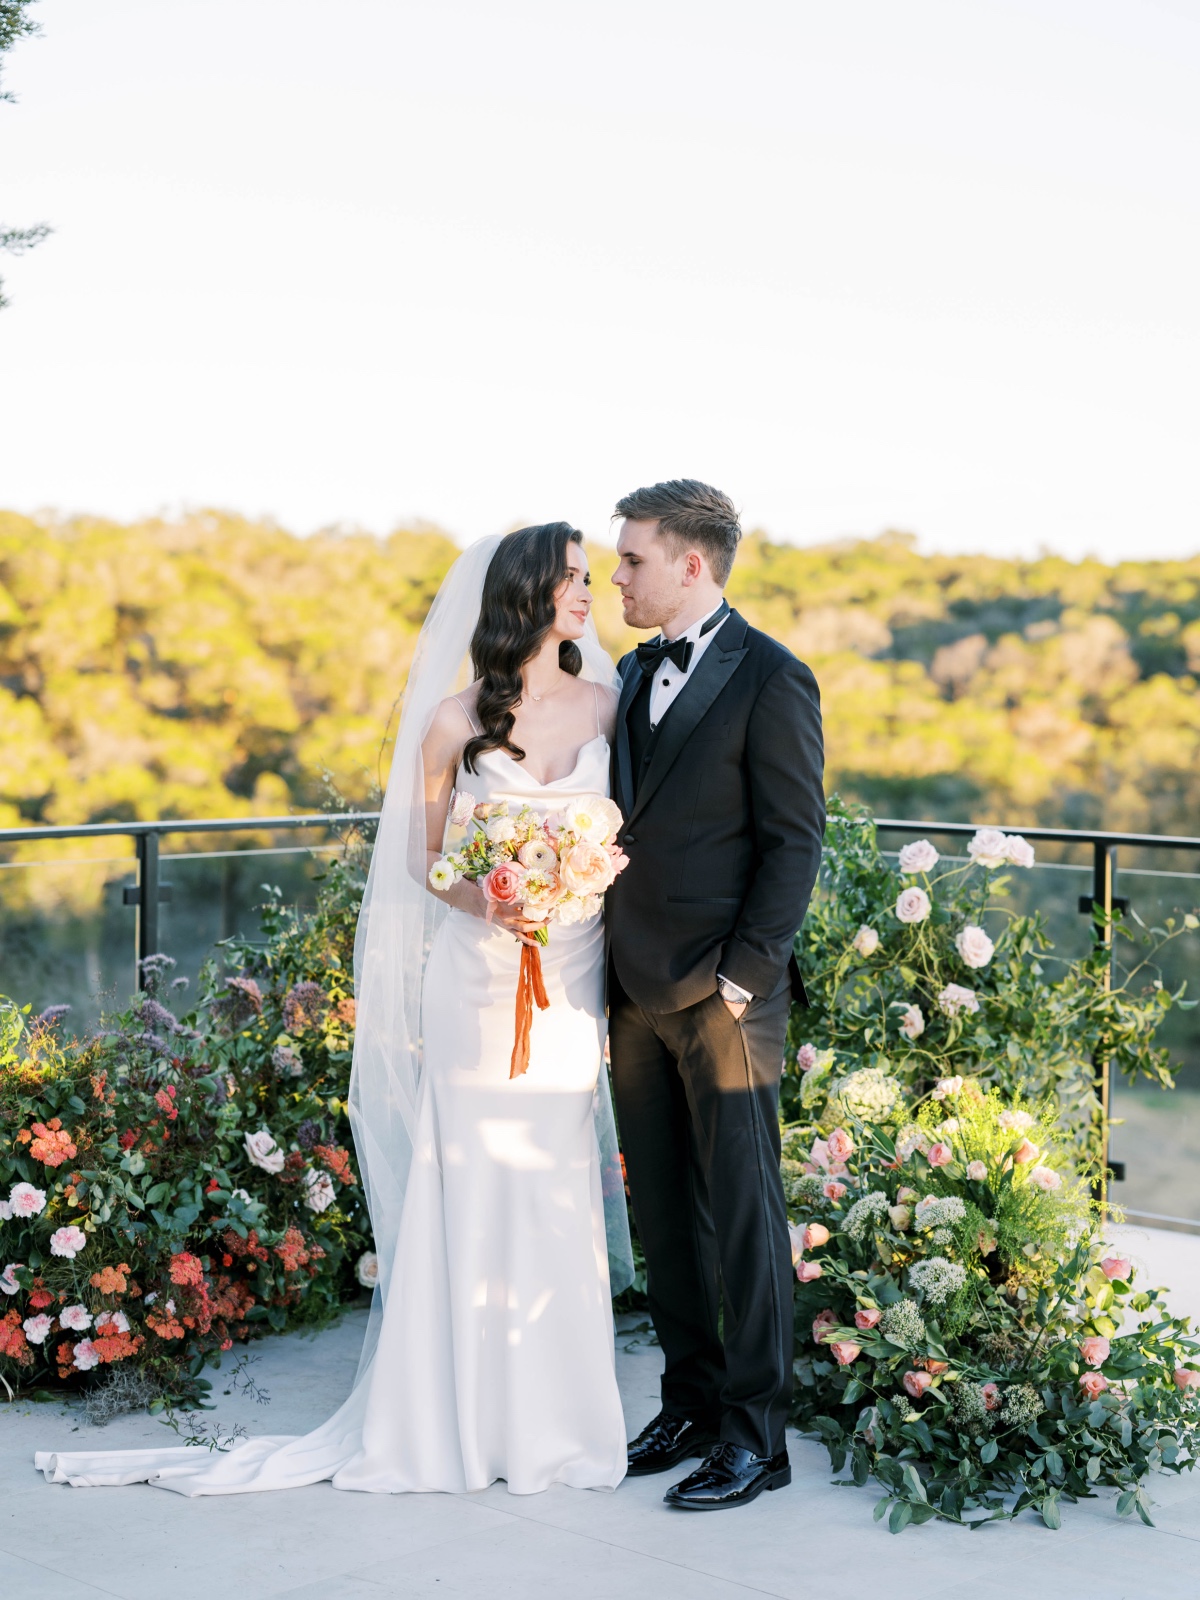 An Italian wedding filled with citrus and cliffside views